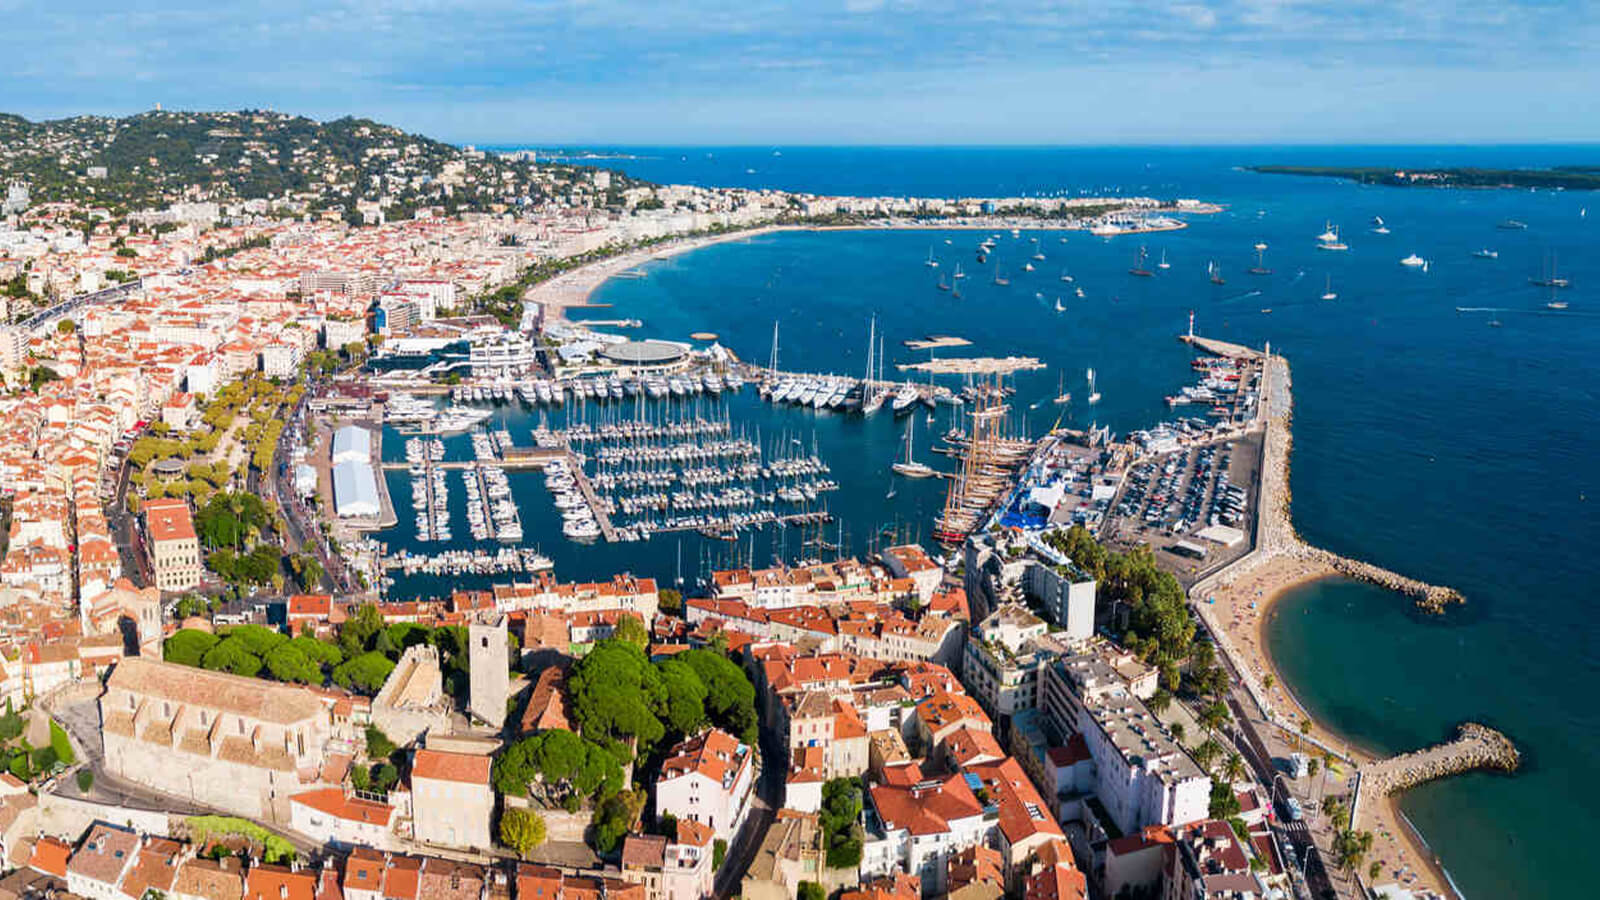 Image of Cannes, France